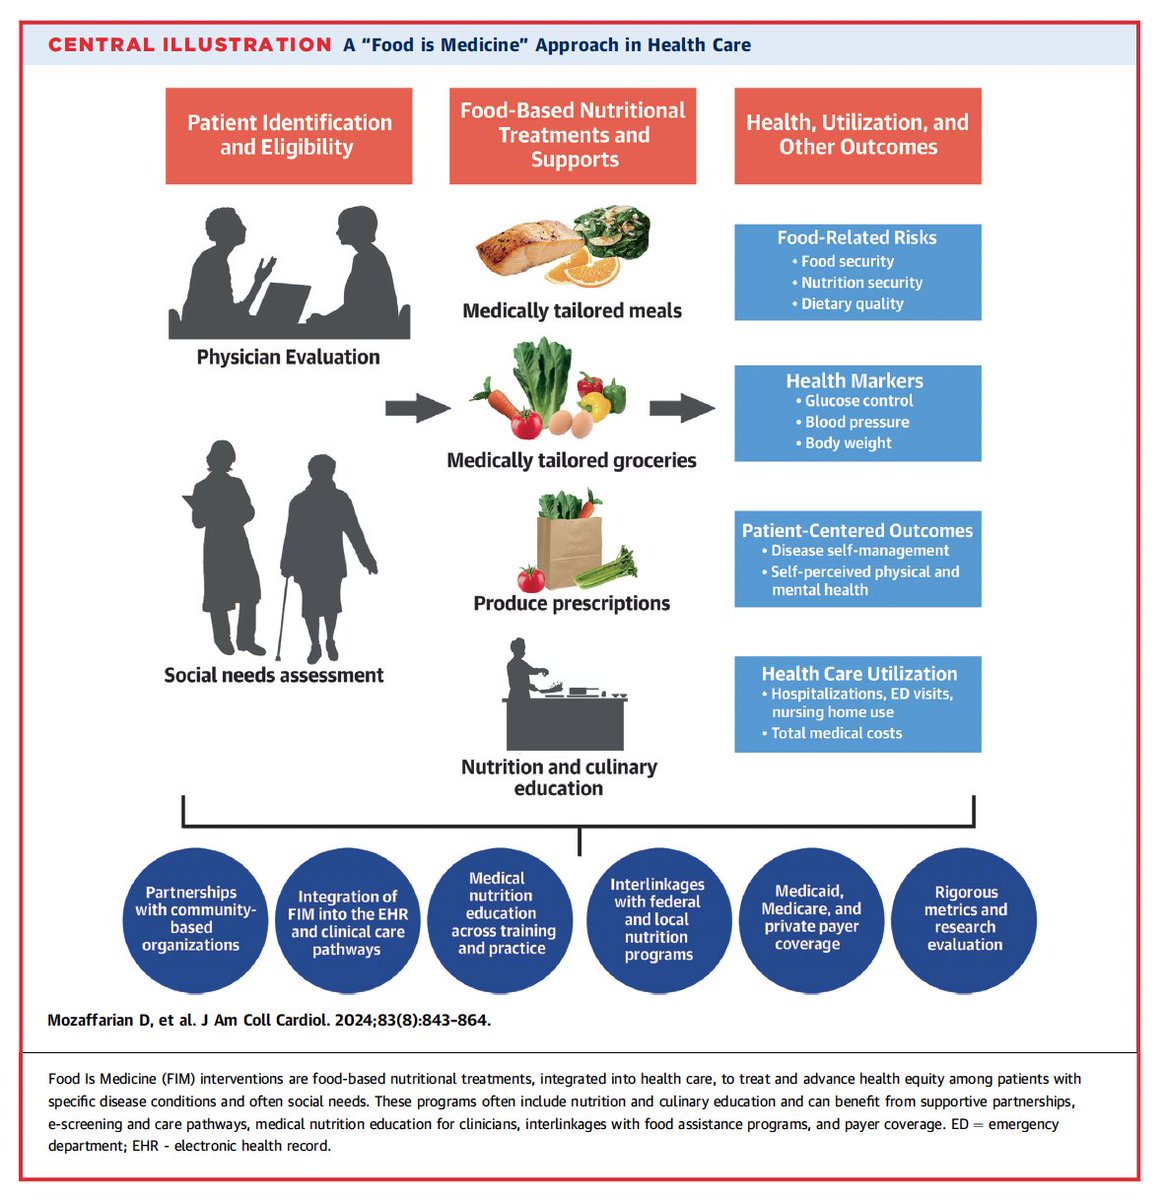 Congrats to our #ACCPrev section on this State of the Art review: 'Food is Medicine' Strategies for Nutrition Security and Cardiometabolic Health Equity published in@JACCJournals Lead by @Dmozaffarian @ACCinTouch @AspryKarenMD @ggvela @cardio10s jacc.org/doi/10.1016/j.…